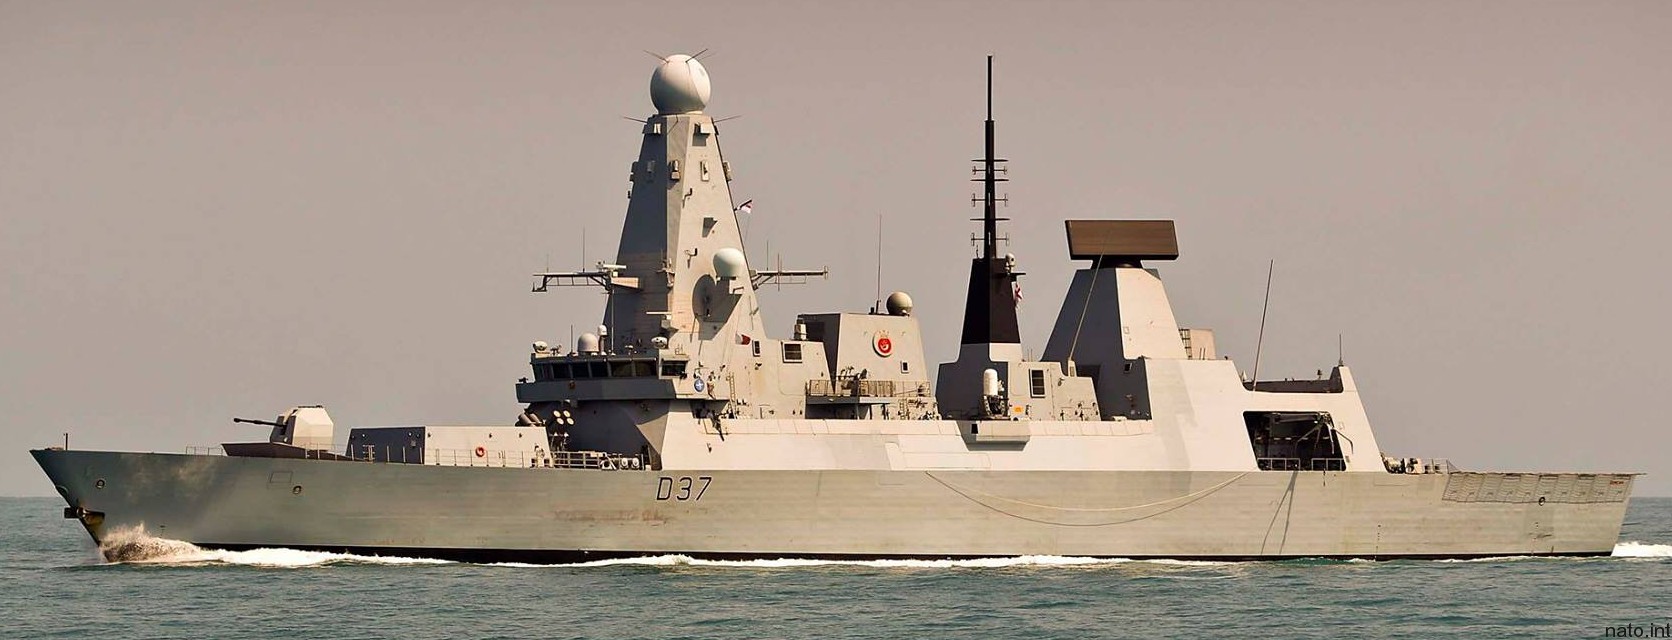 hms duncan d-37 type 45 daring class guided missile destroyer ddg royal navy sea viper paams 28